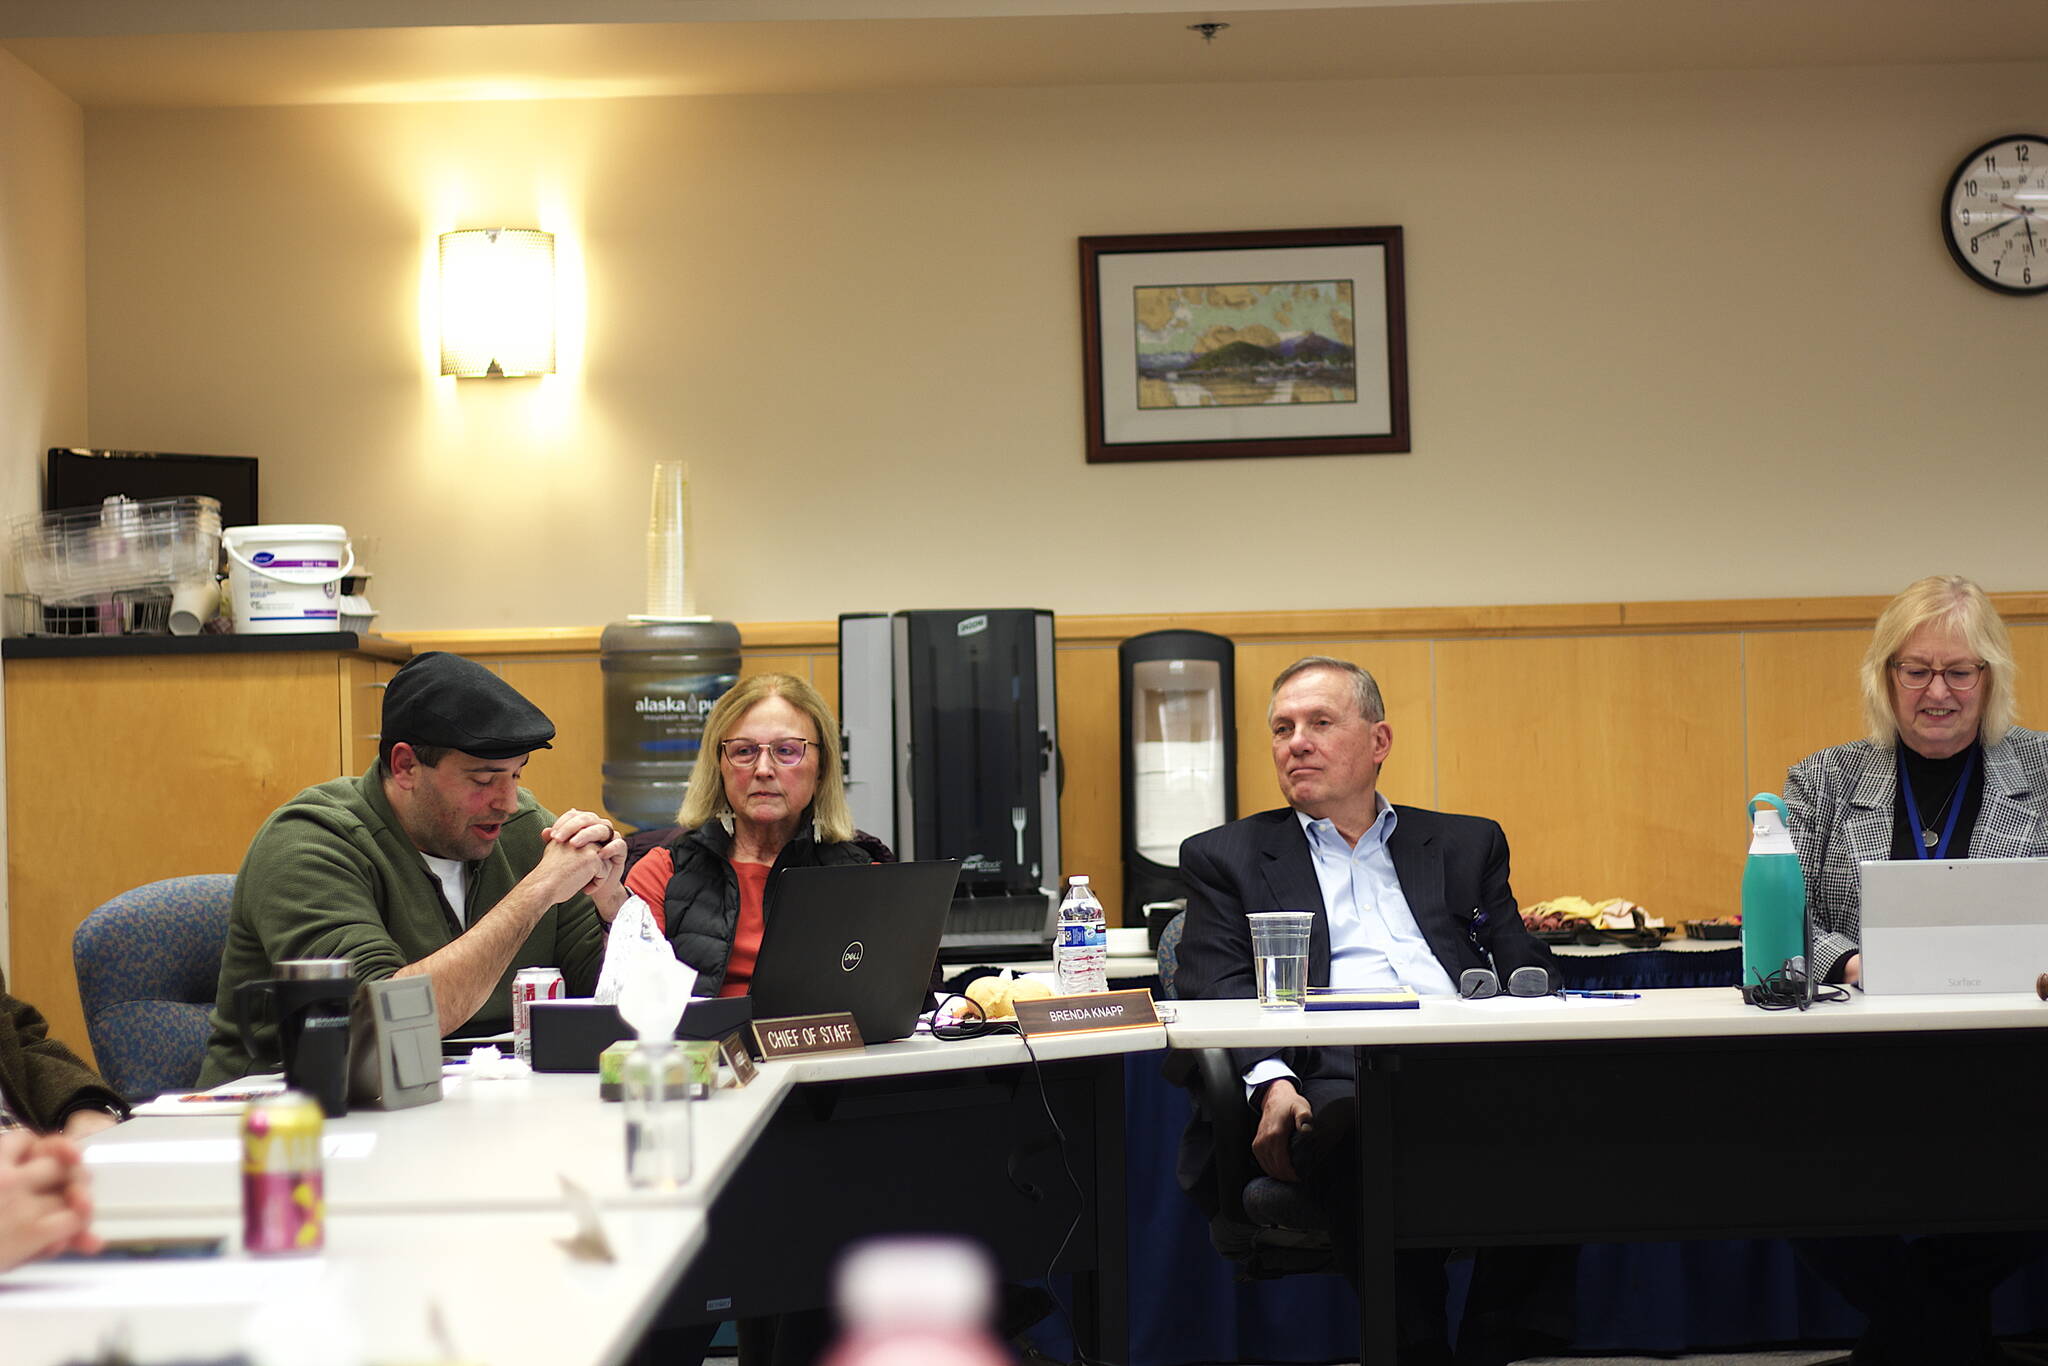 Leaders at Bartlett Regional Hospital discuss staffing matters during a board of directors meeting Oct. 30 in the hospital’s administration building. The board is among several city governing bodies seeking new members. (Mark Sabbatini / Juneau Empire File)